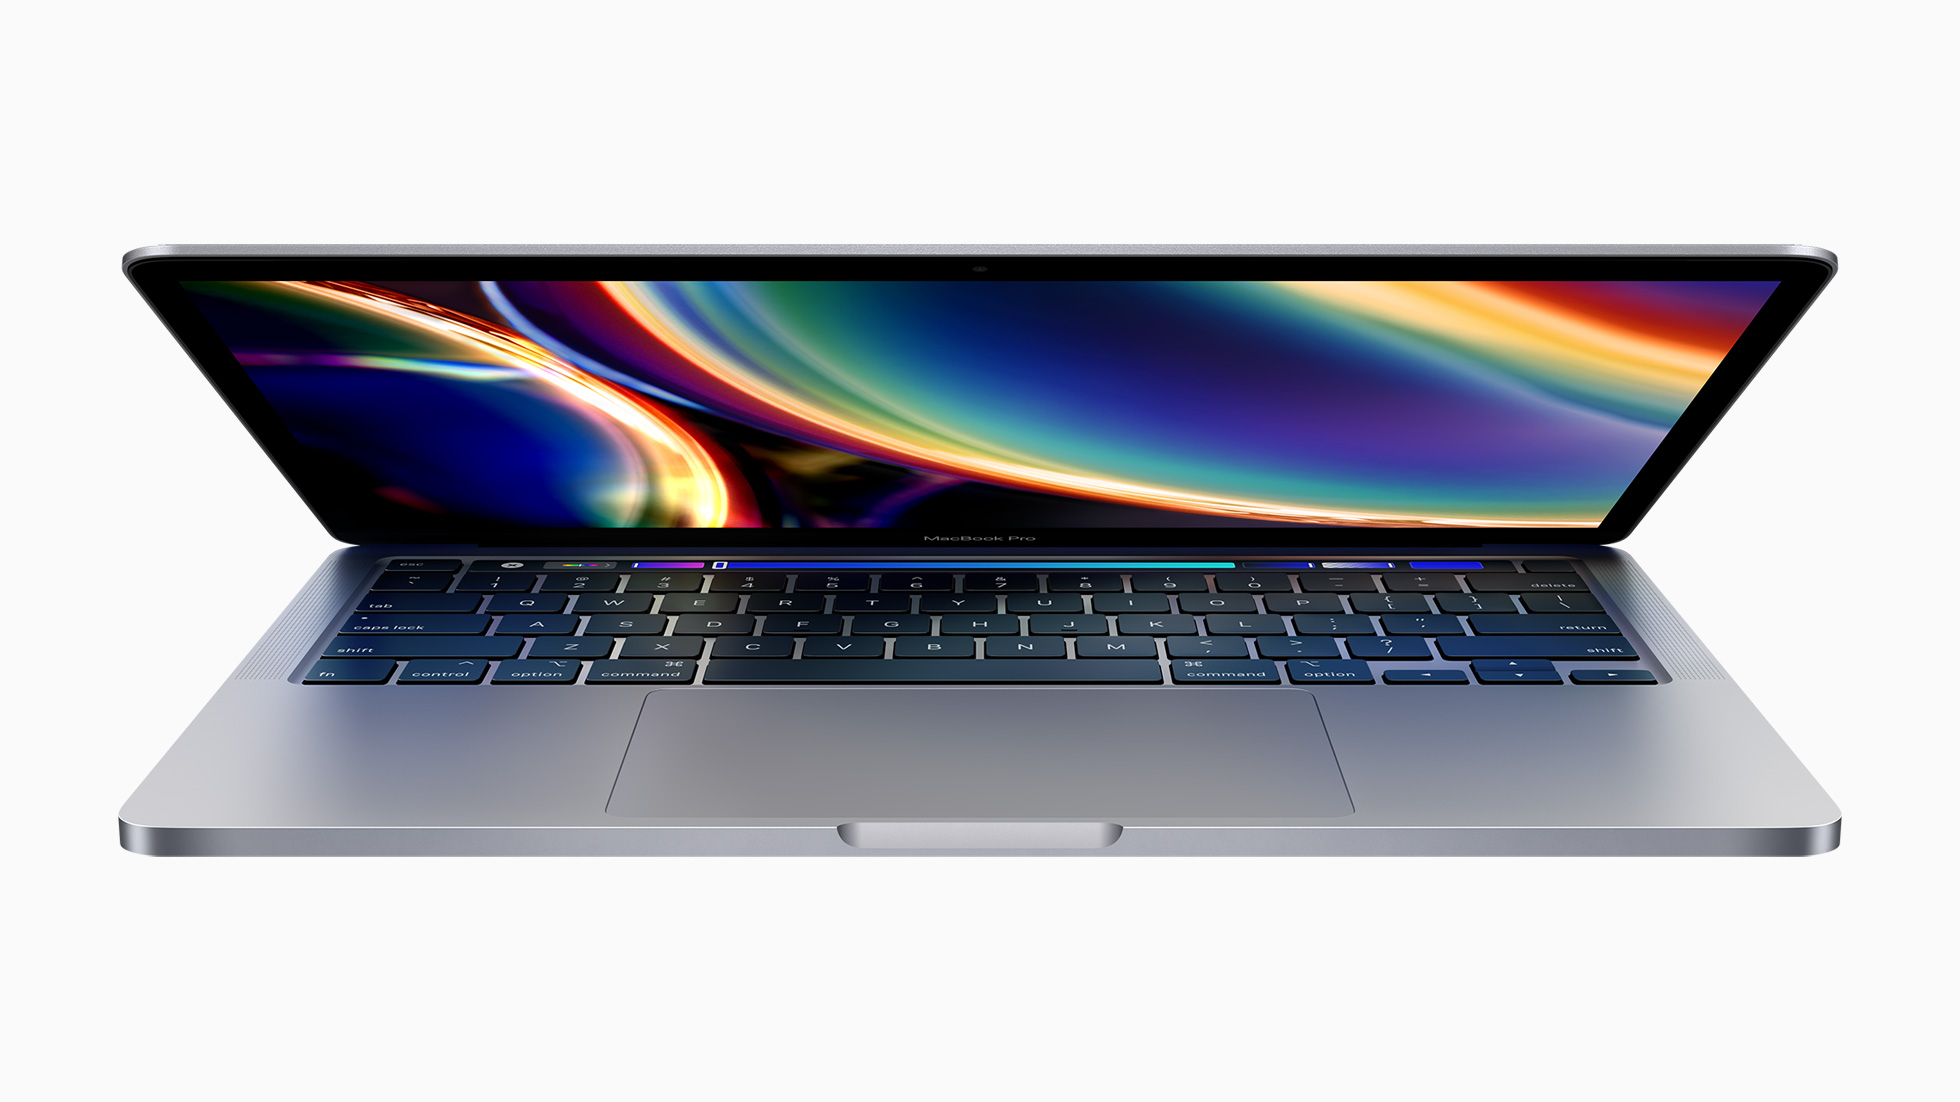 Geekbench confirms new MacBook Pro model identifiers and Core i5 